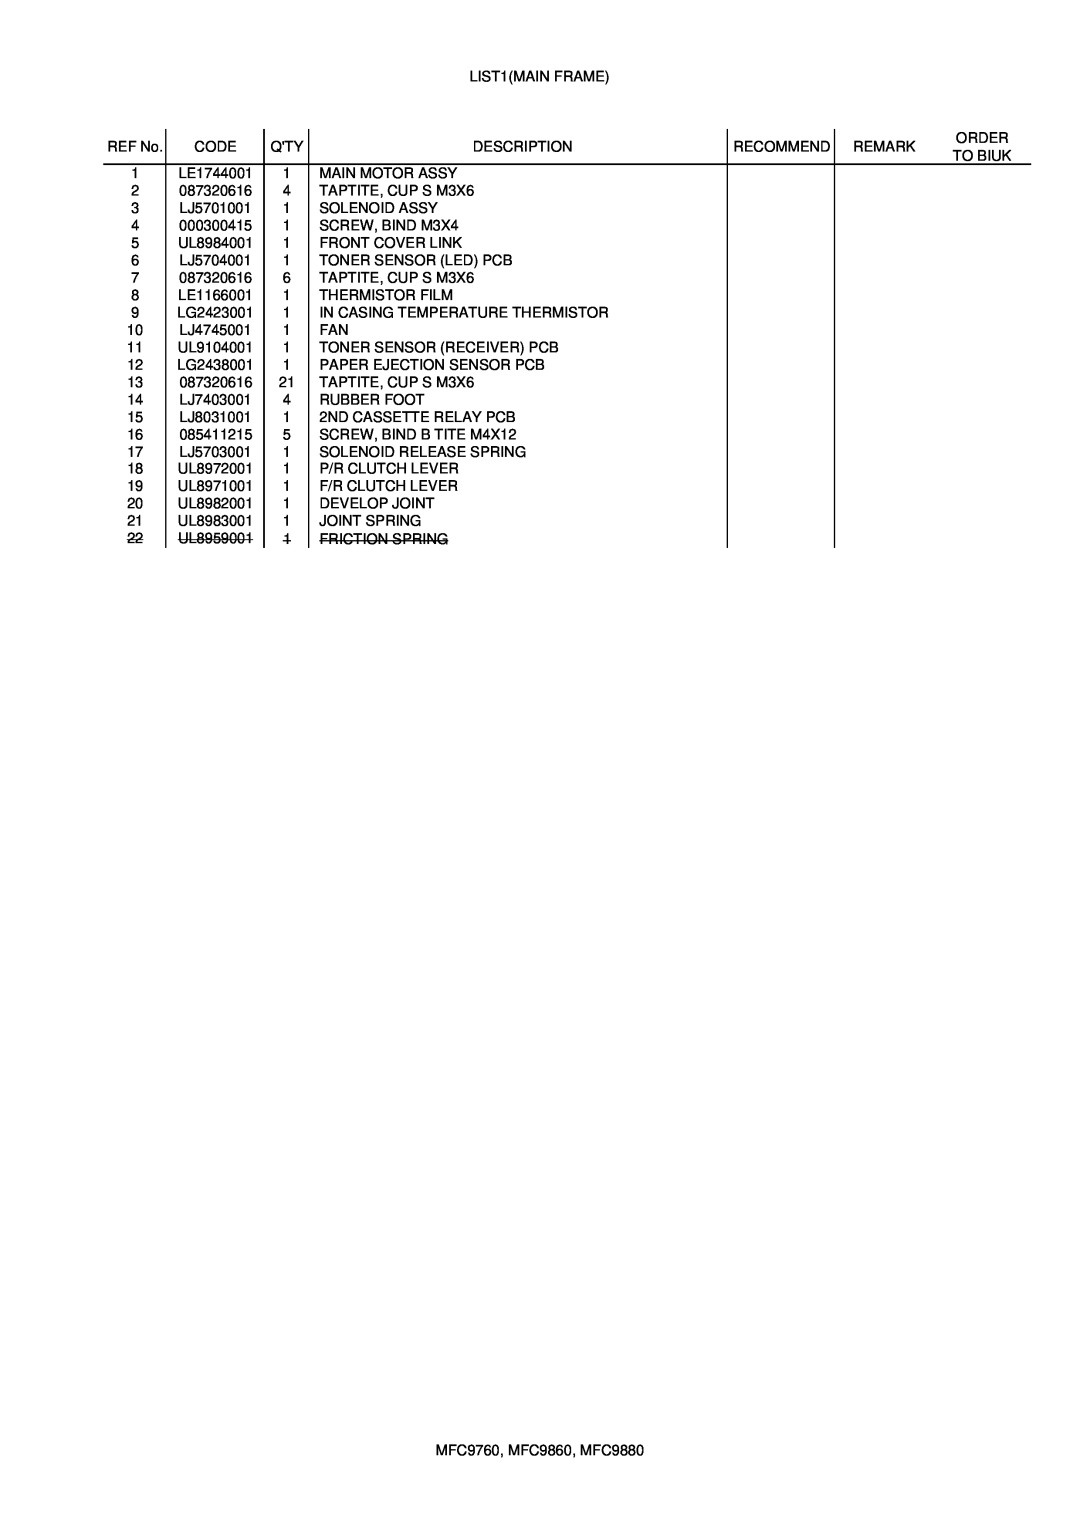 Brother MFC9860, 9880 manual LIST1MAIN FRAME 